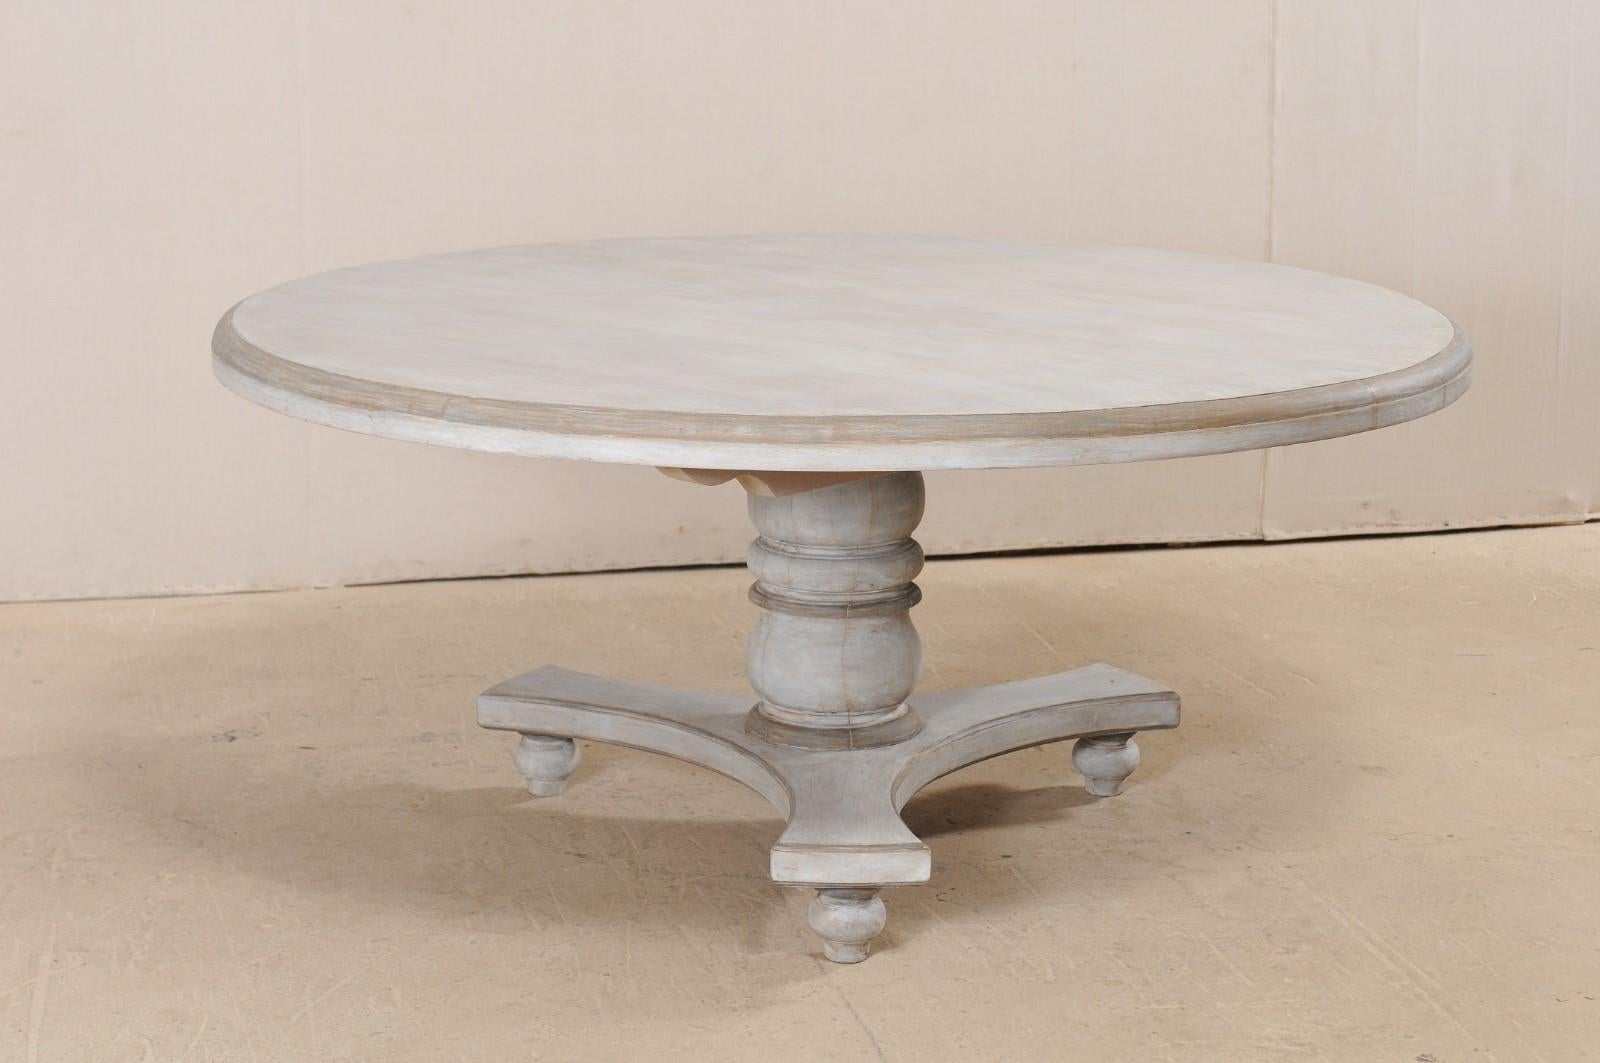 A lovely round-shaped pedestal table which has been newly fashioned making use of old recycled jackwood. The table features a round top, approximately 5.5' in diameter, atop a thickly turned center pedestal with tripod base extending out, supported